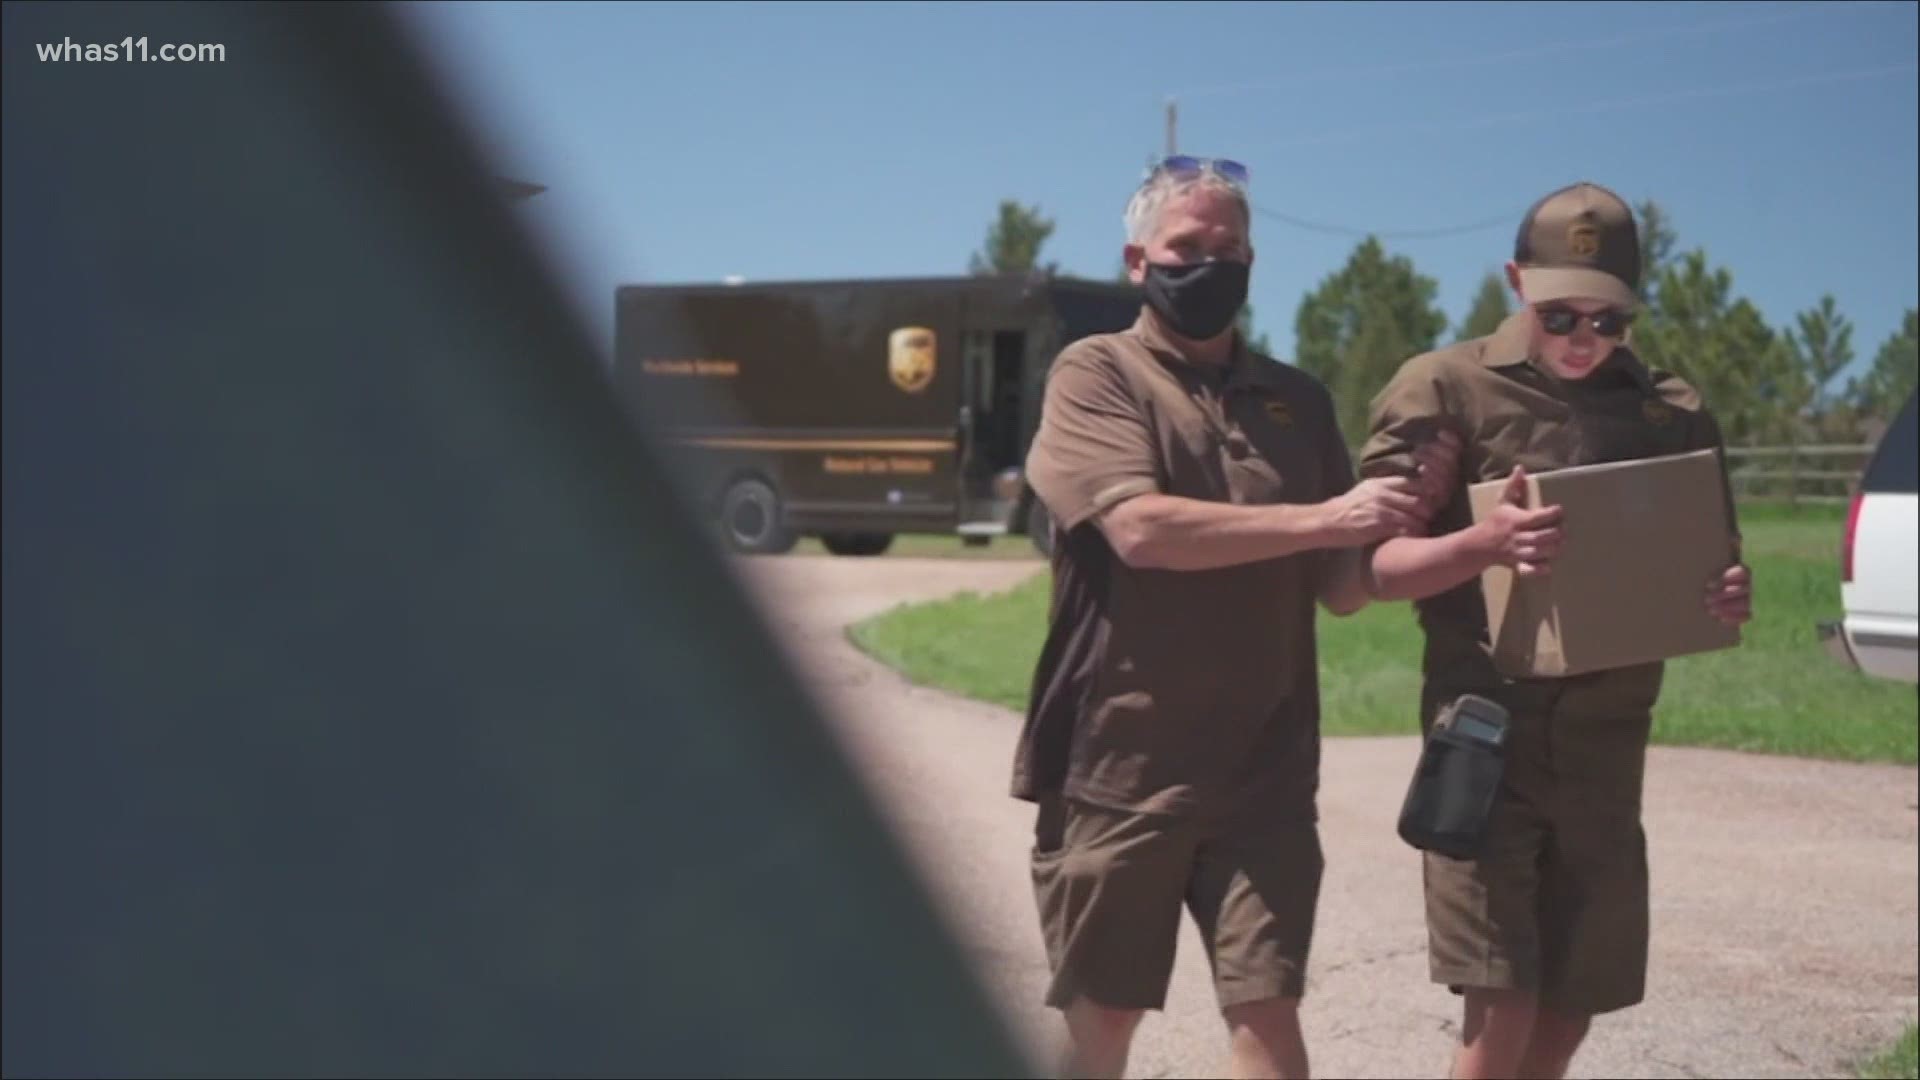 Colorado UPS driver delivers wish for Caleb, a boy with a congenital brain defect, similar to what his late son had.